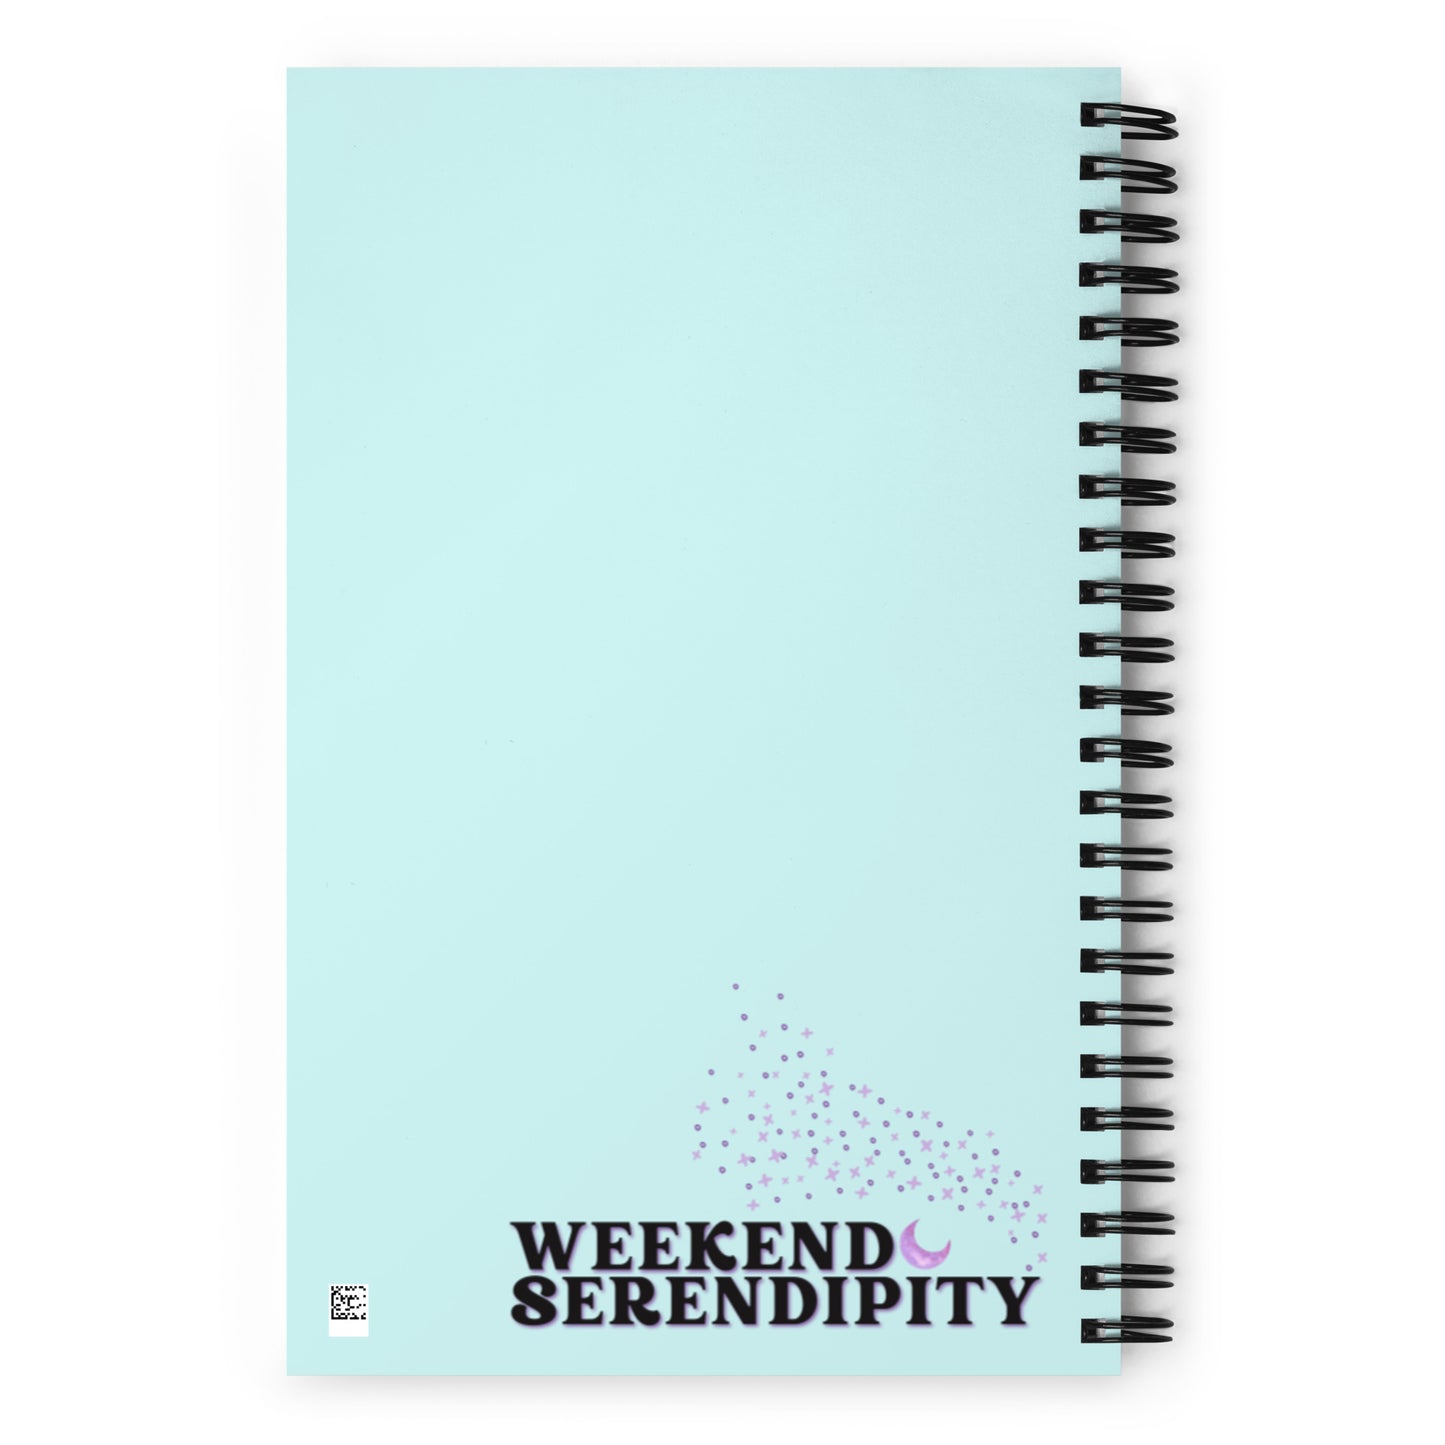 backside of a spiral bound notebook with the Weekend Serendipity logo